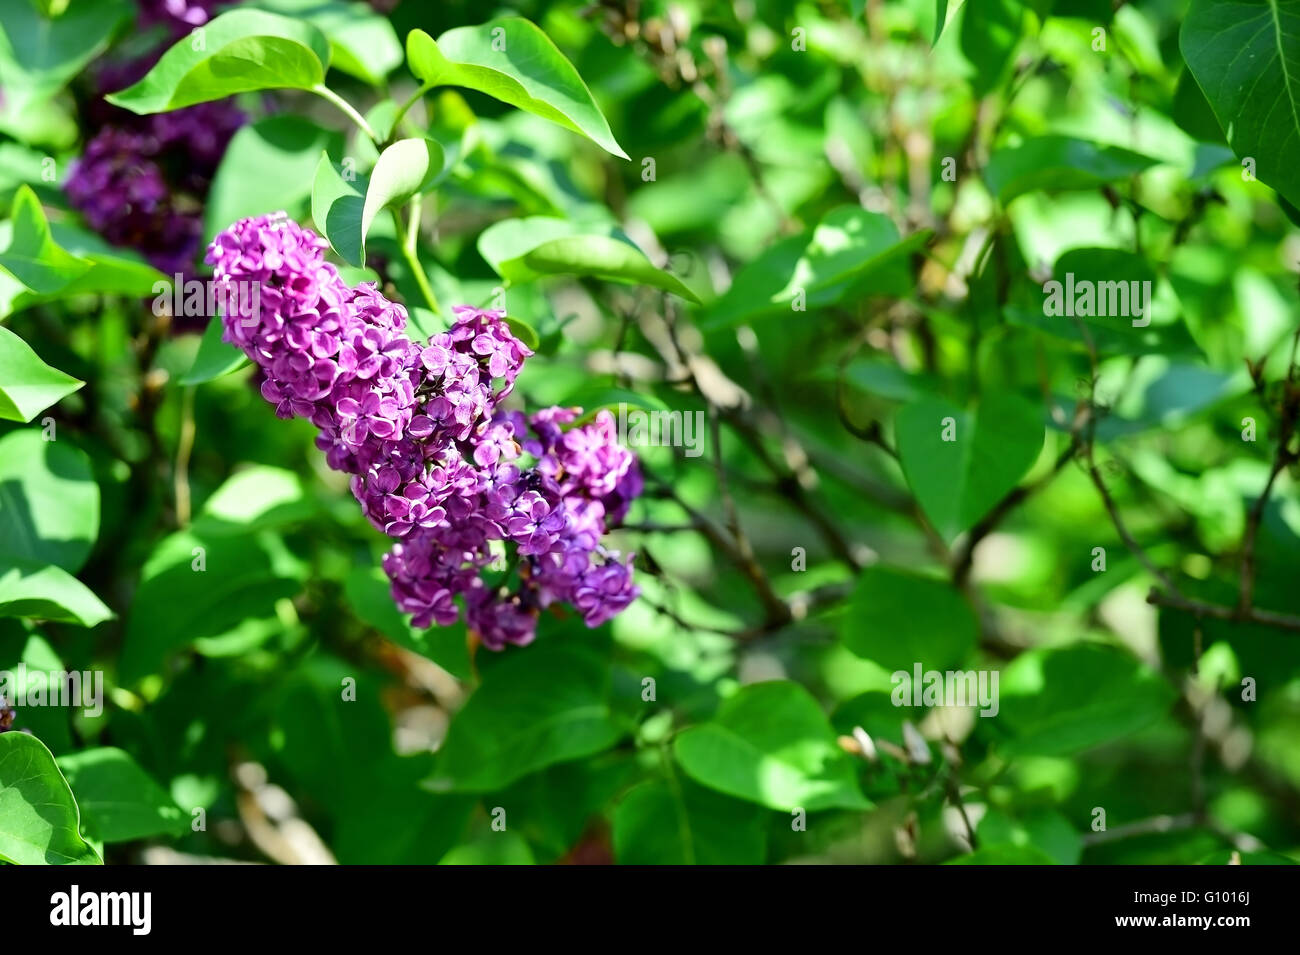 Lilac flowers blooming on lilac tree branch in early springtime Stock Photo